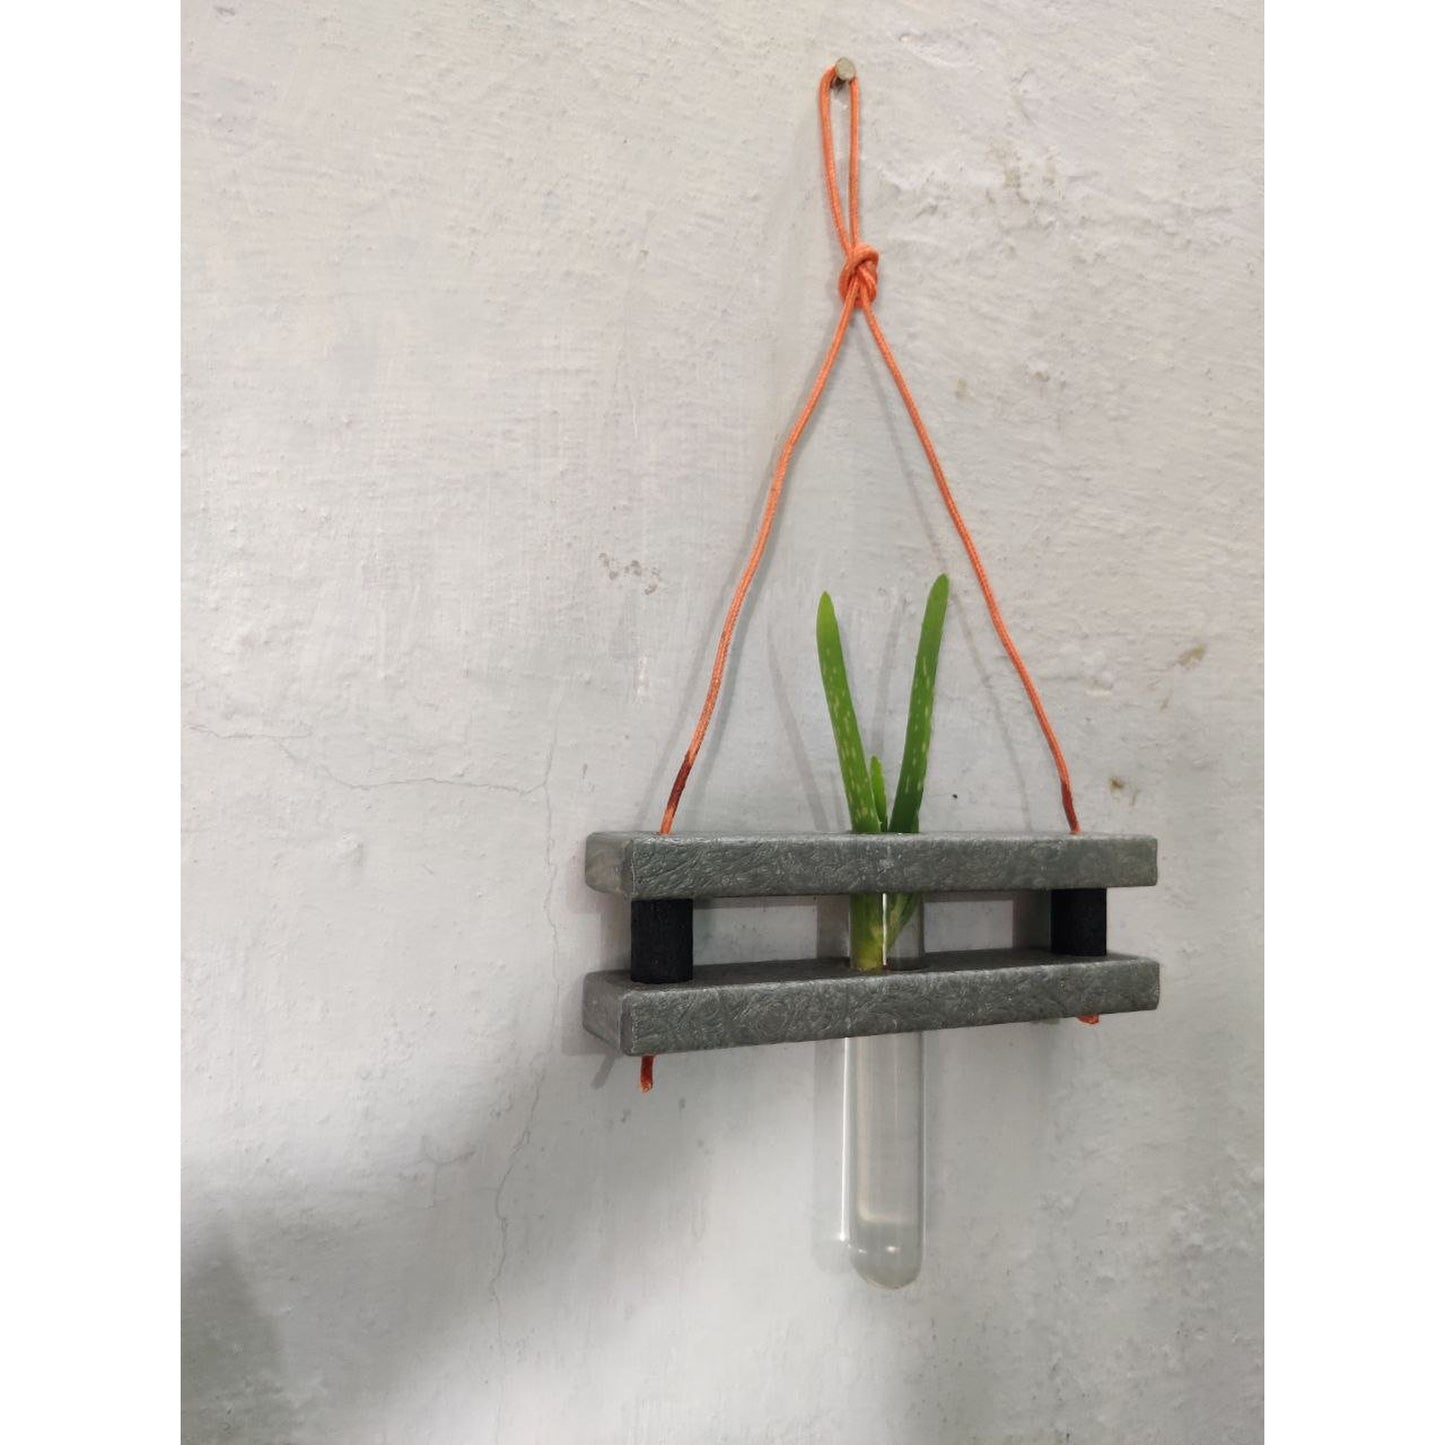 Eco Test Tube Hanging Planter - The Teal Thread